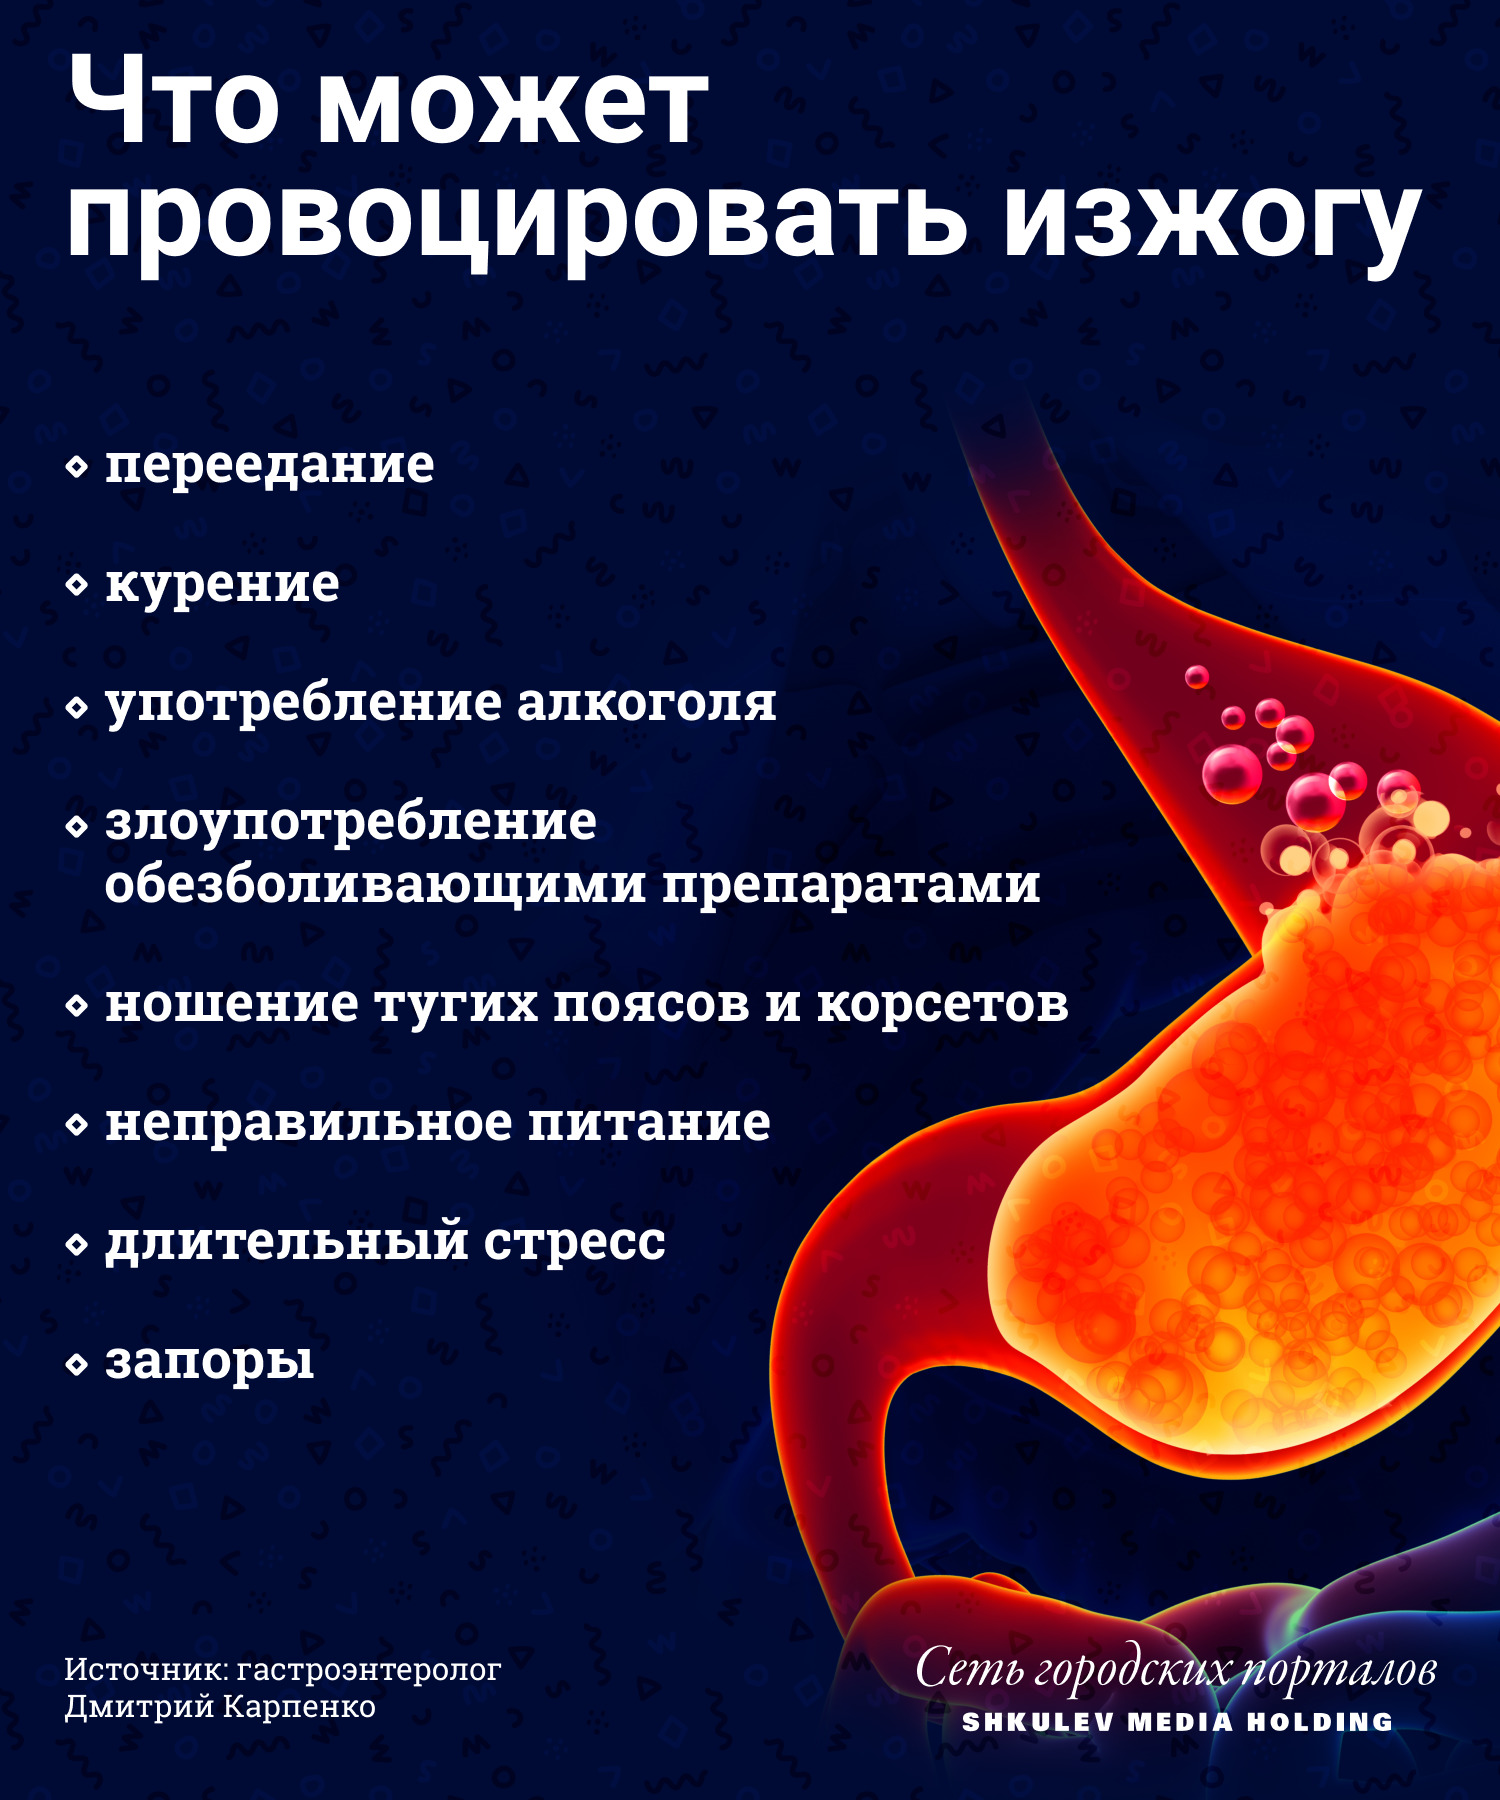 Our body has many reasons for heartburn and without acute